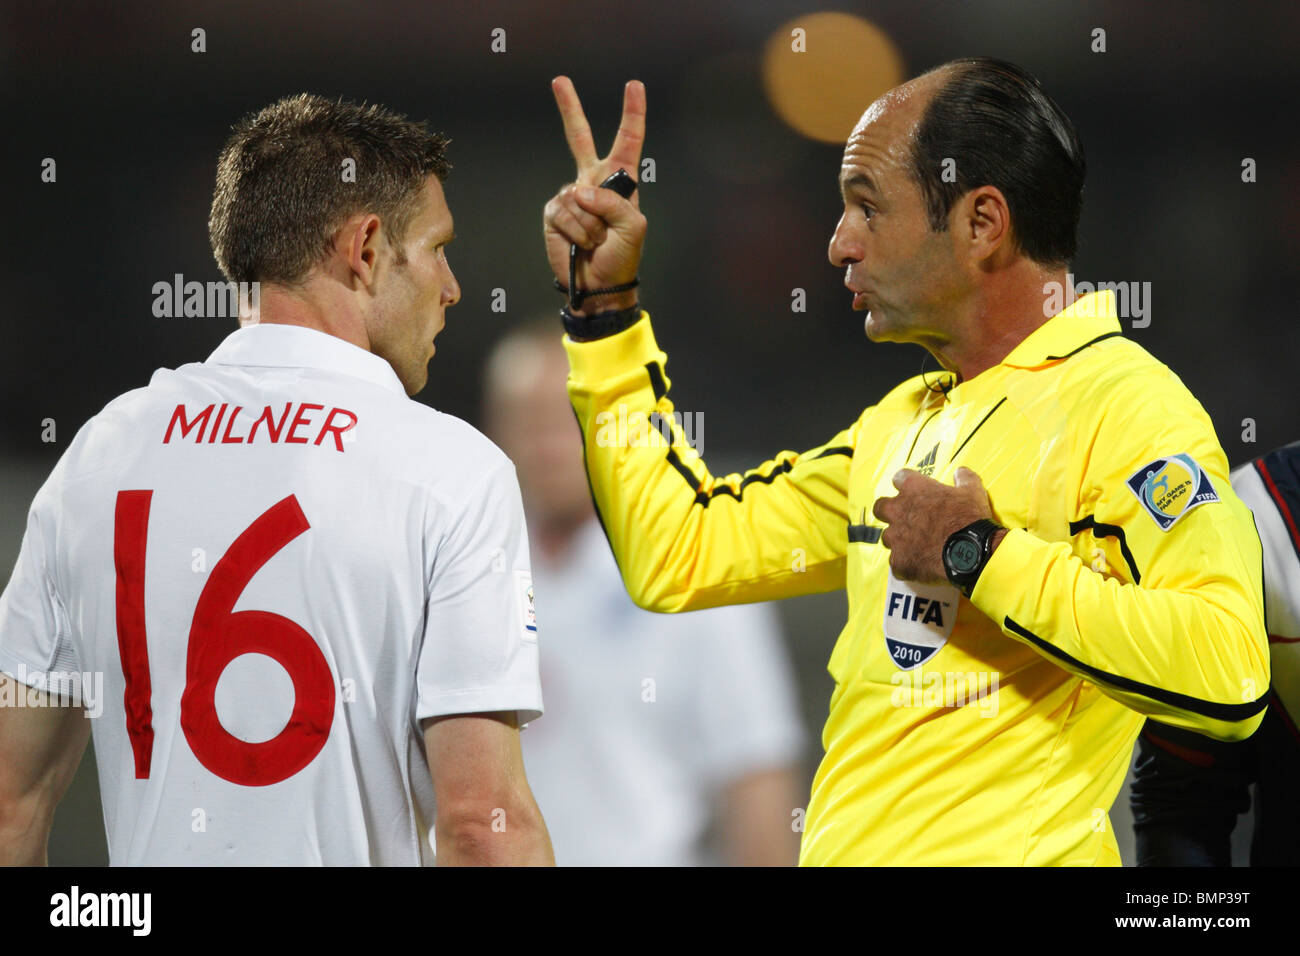 James Milner of England about to be booked by referee Carlos Simon during a 2010 FIFA World Cup football match against the USA. Stock Photo